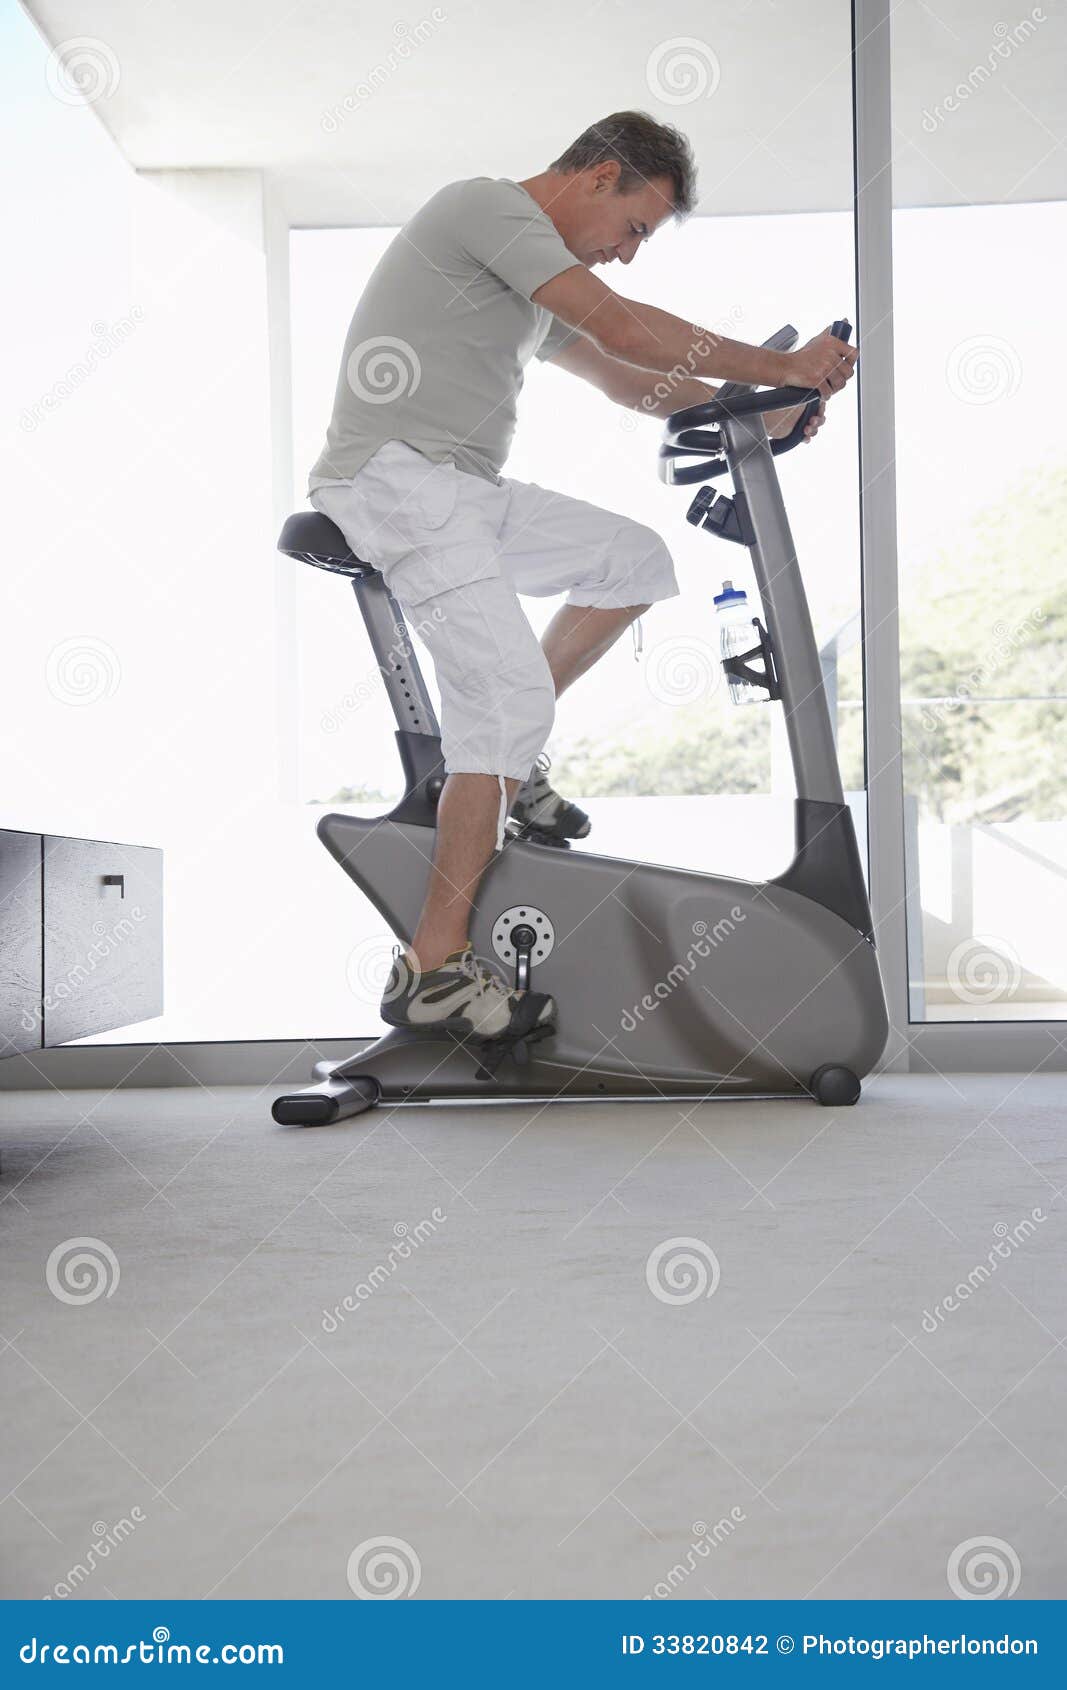 man on exercise bike pedaling at home